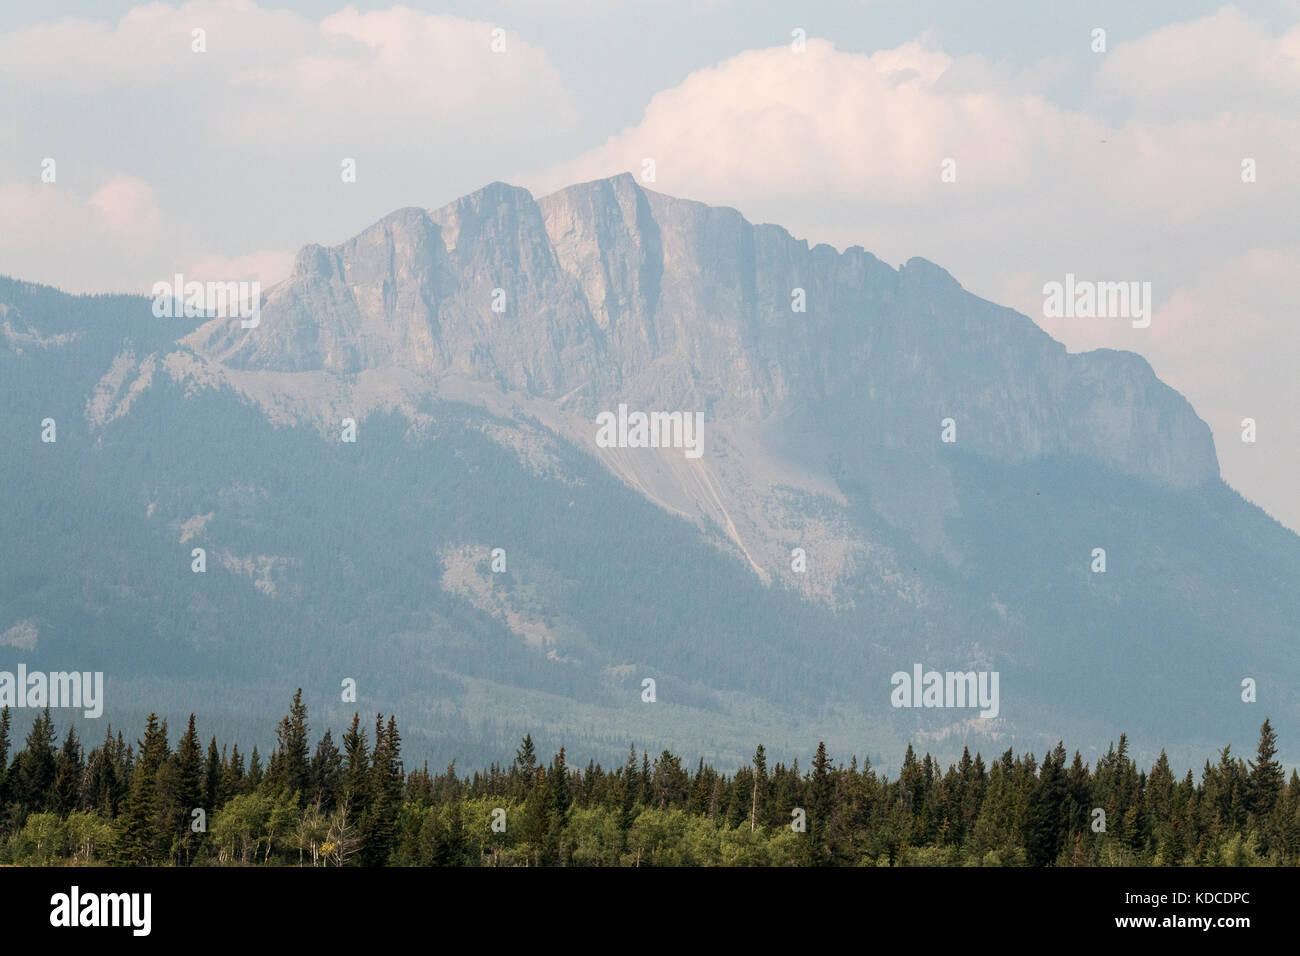 A mountain is visible in Kananaskis country through the haze of smoke from forest fires. Stock Photo